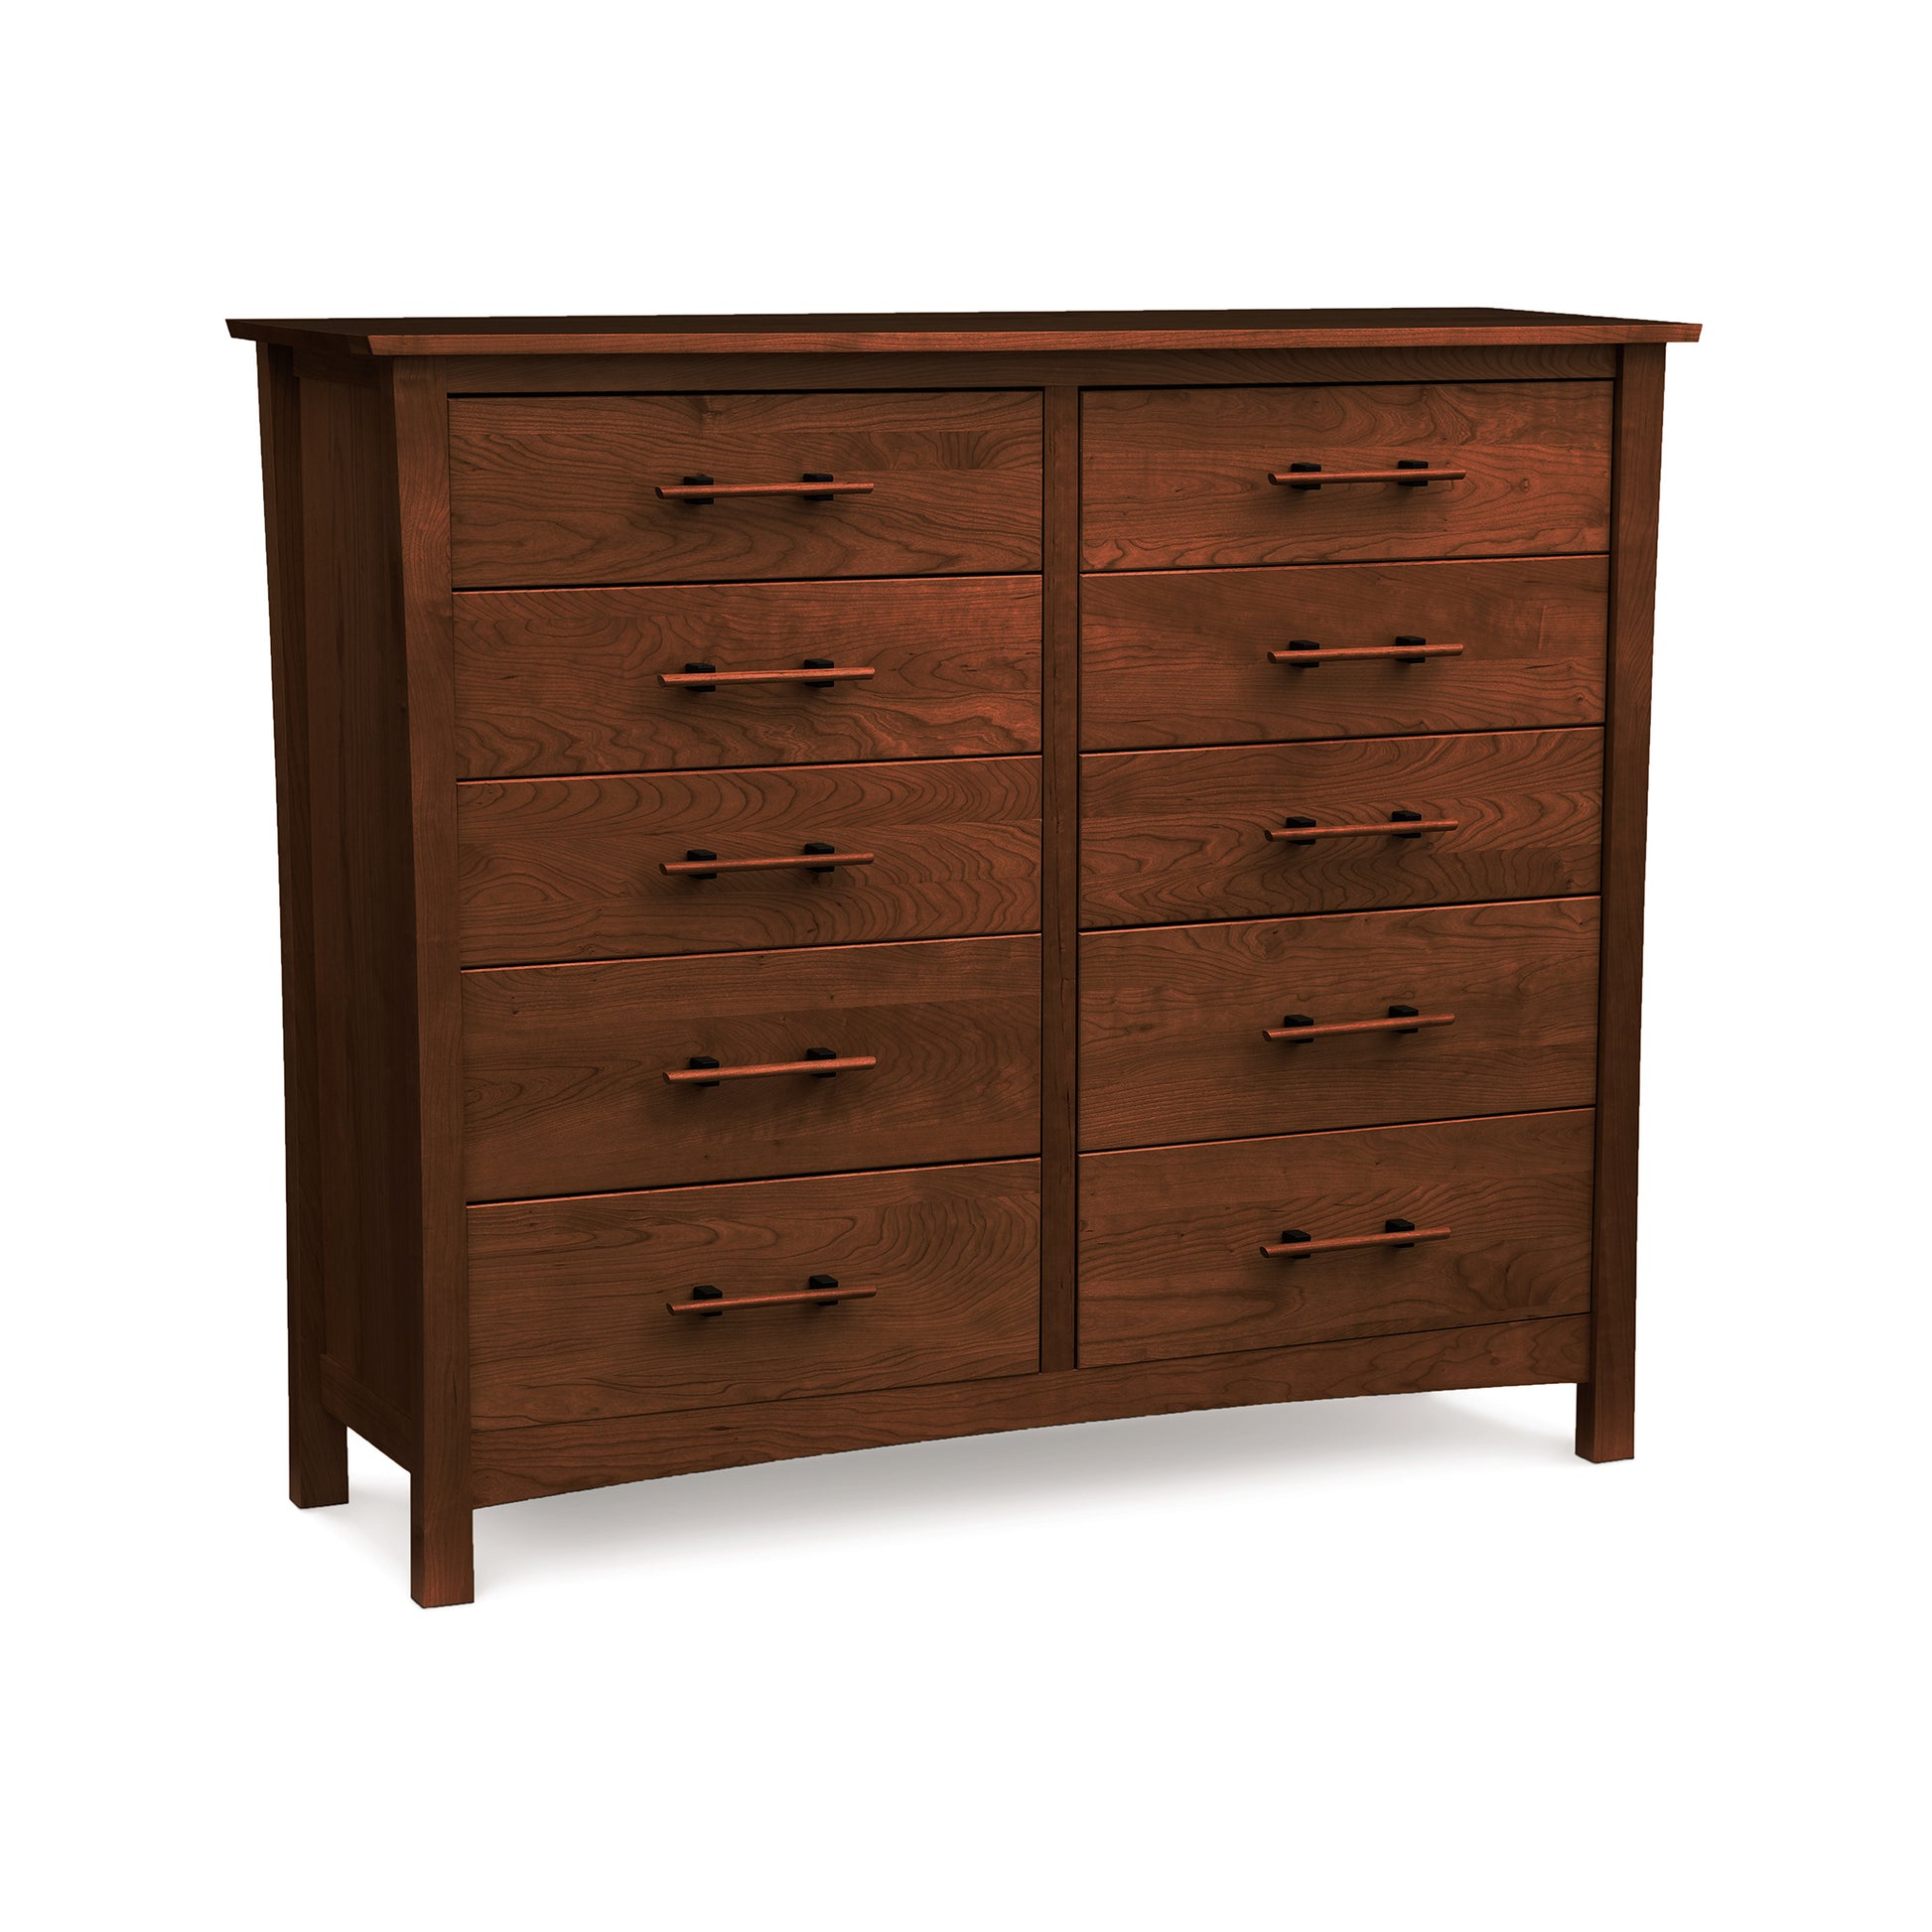 A cherry wood Copeland Furniture Monterey 10-Drawer Dresser with ten pull-out drawers arranged in two vertical columns.